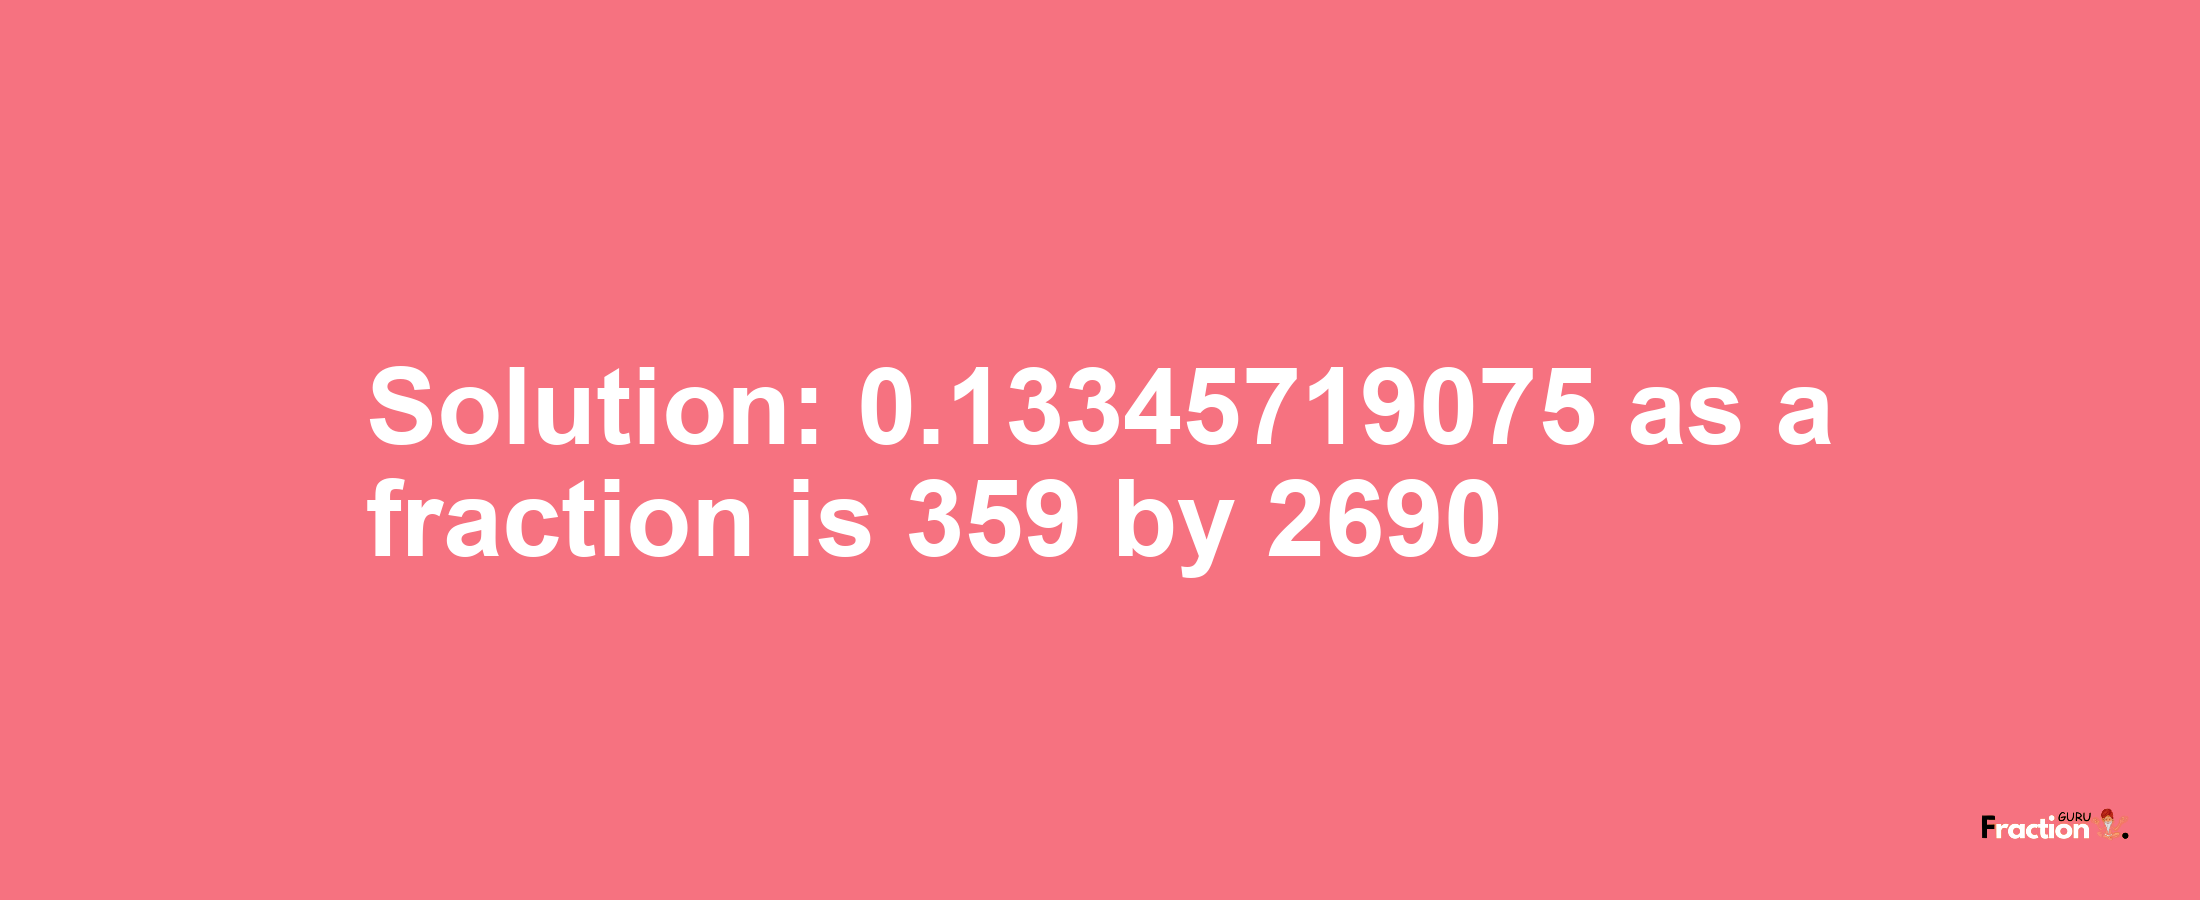 Solution:0.13345719075 as a fraction is 359/2690